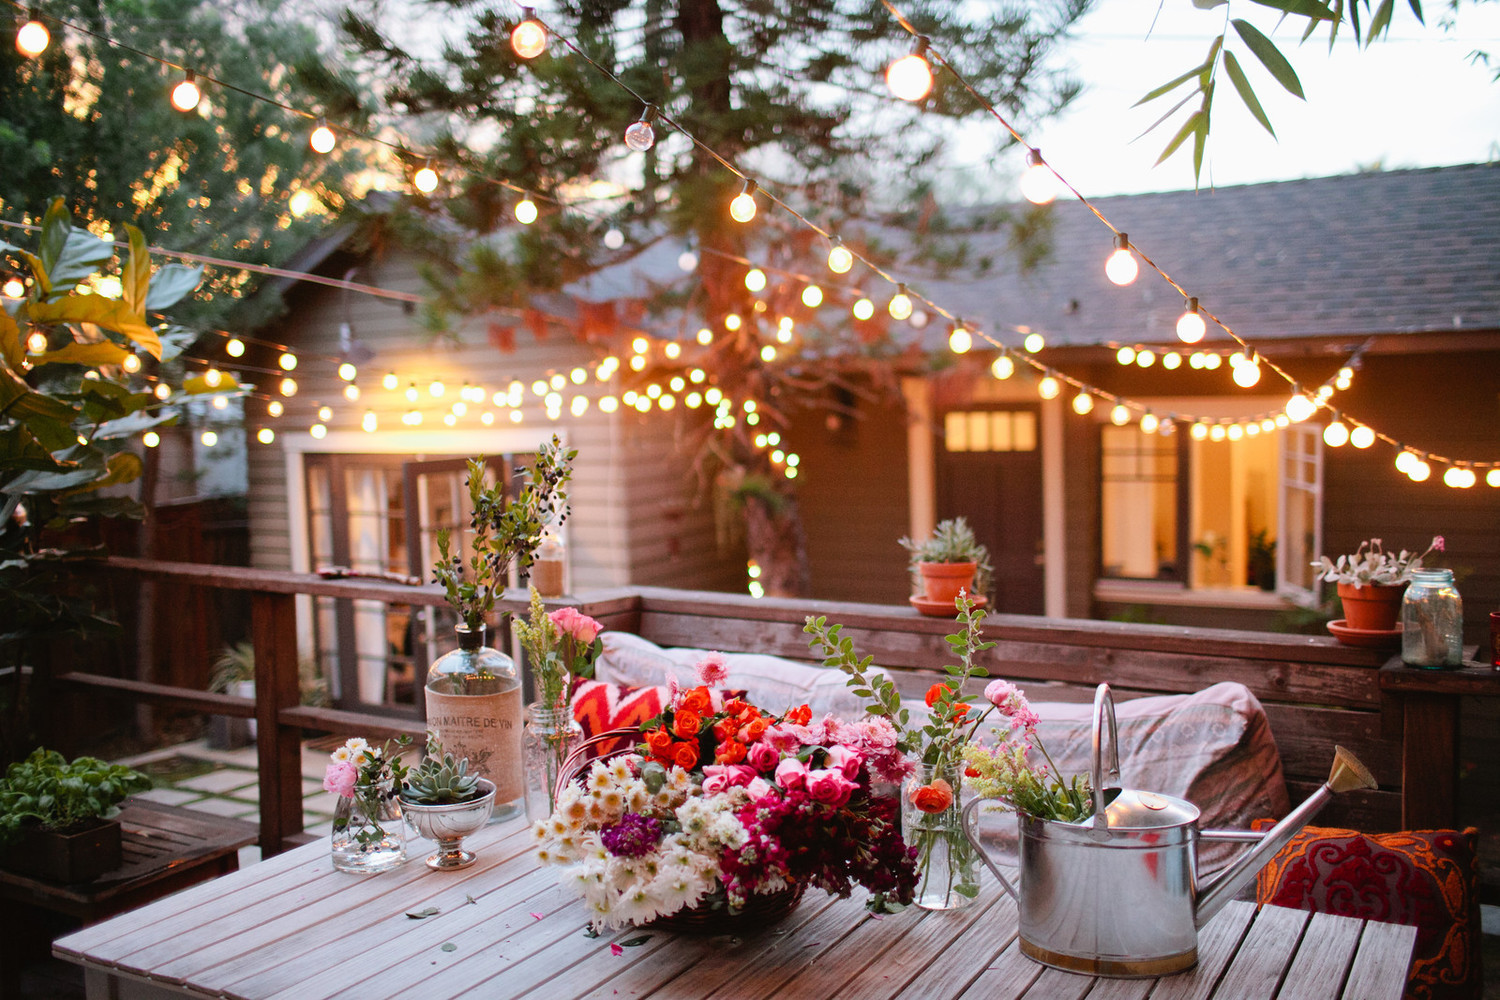 Backyard Party Lights Ideas
 A New Pergola on the Deck from Thrifty Decor Chick